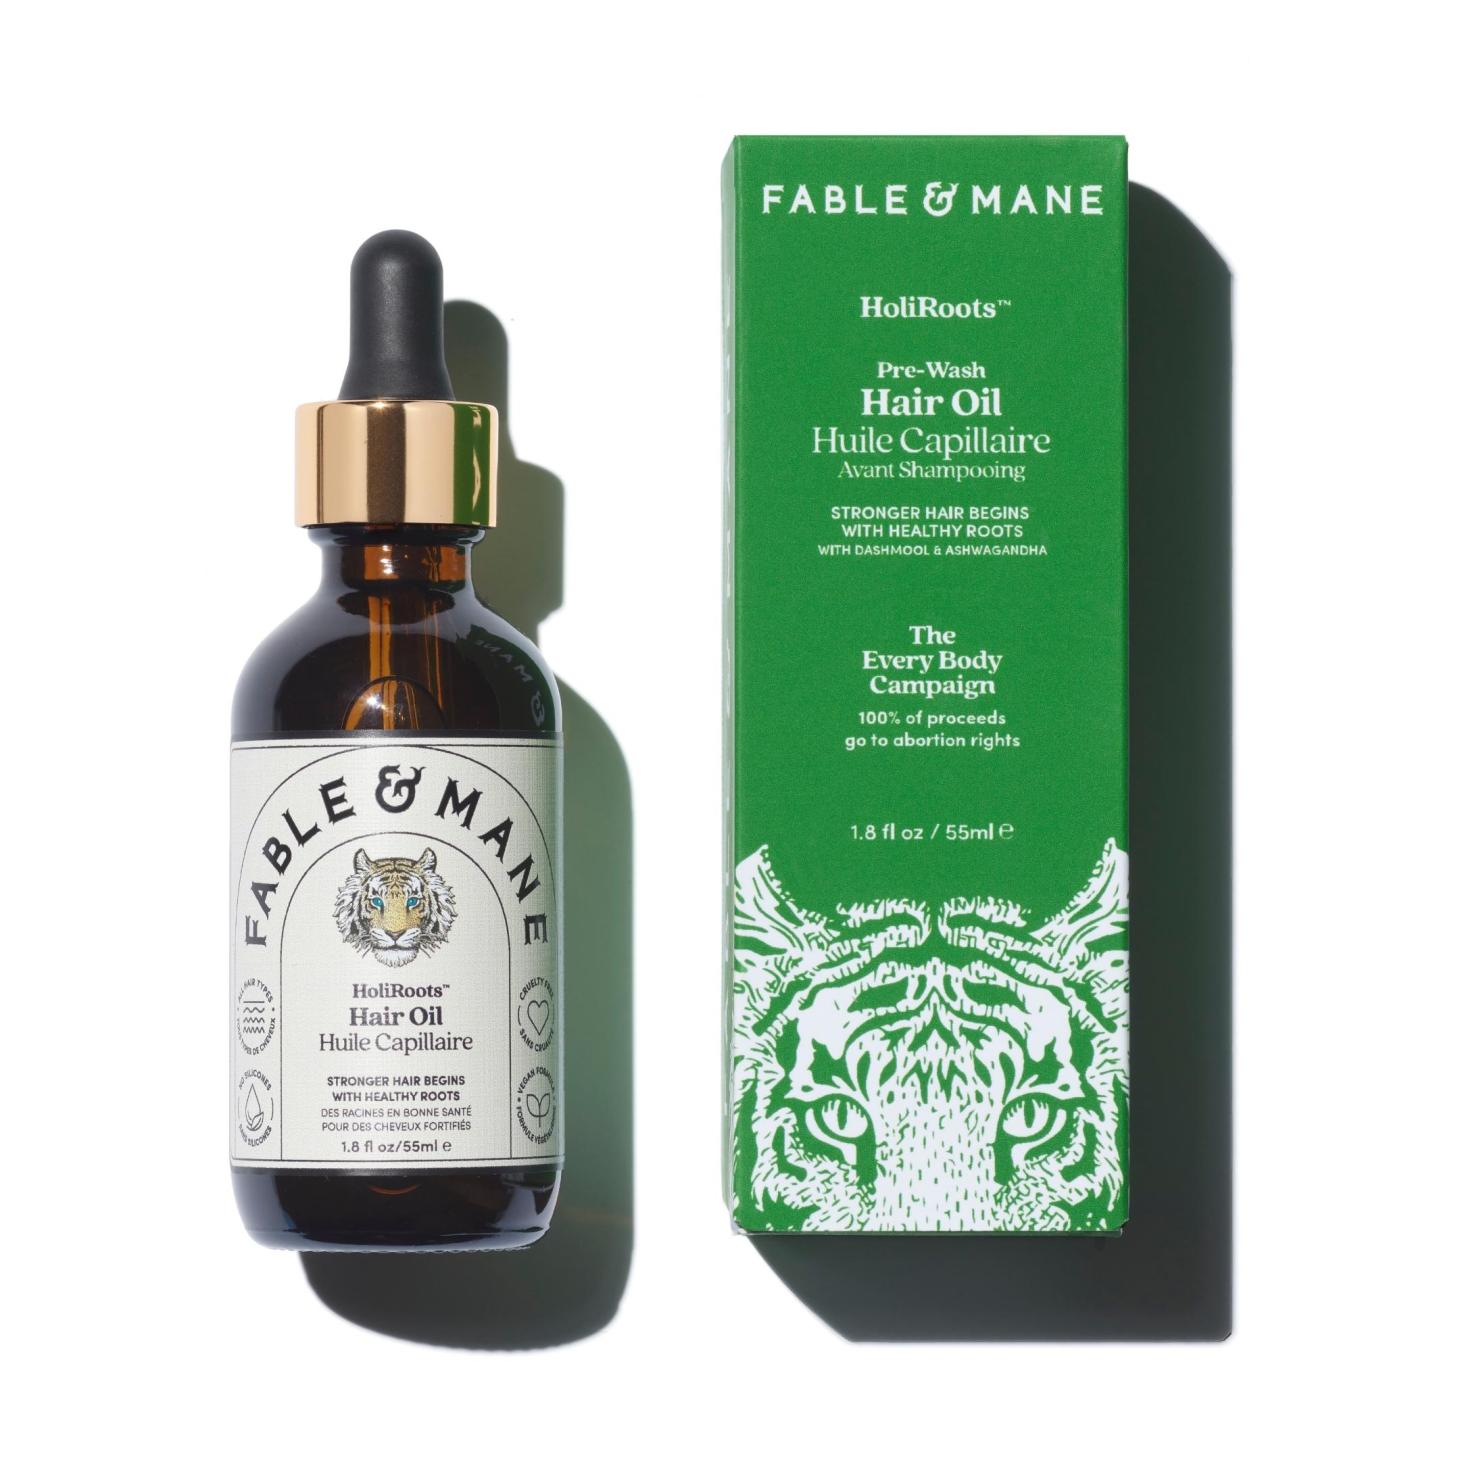 Fable & Mane, ‘The Every Body’ HoliRoots Hair Oil